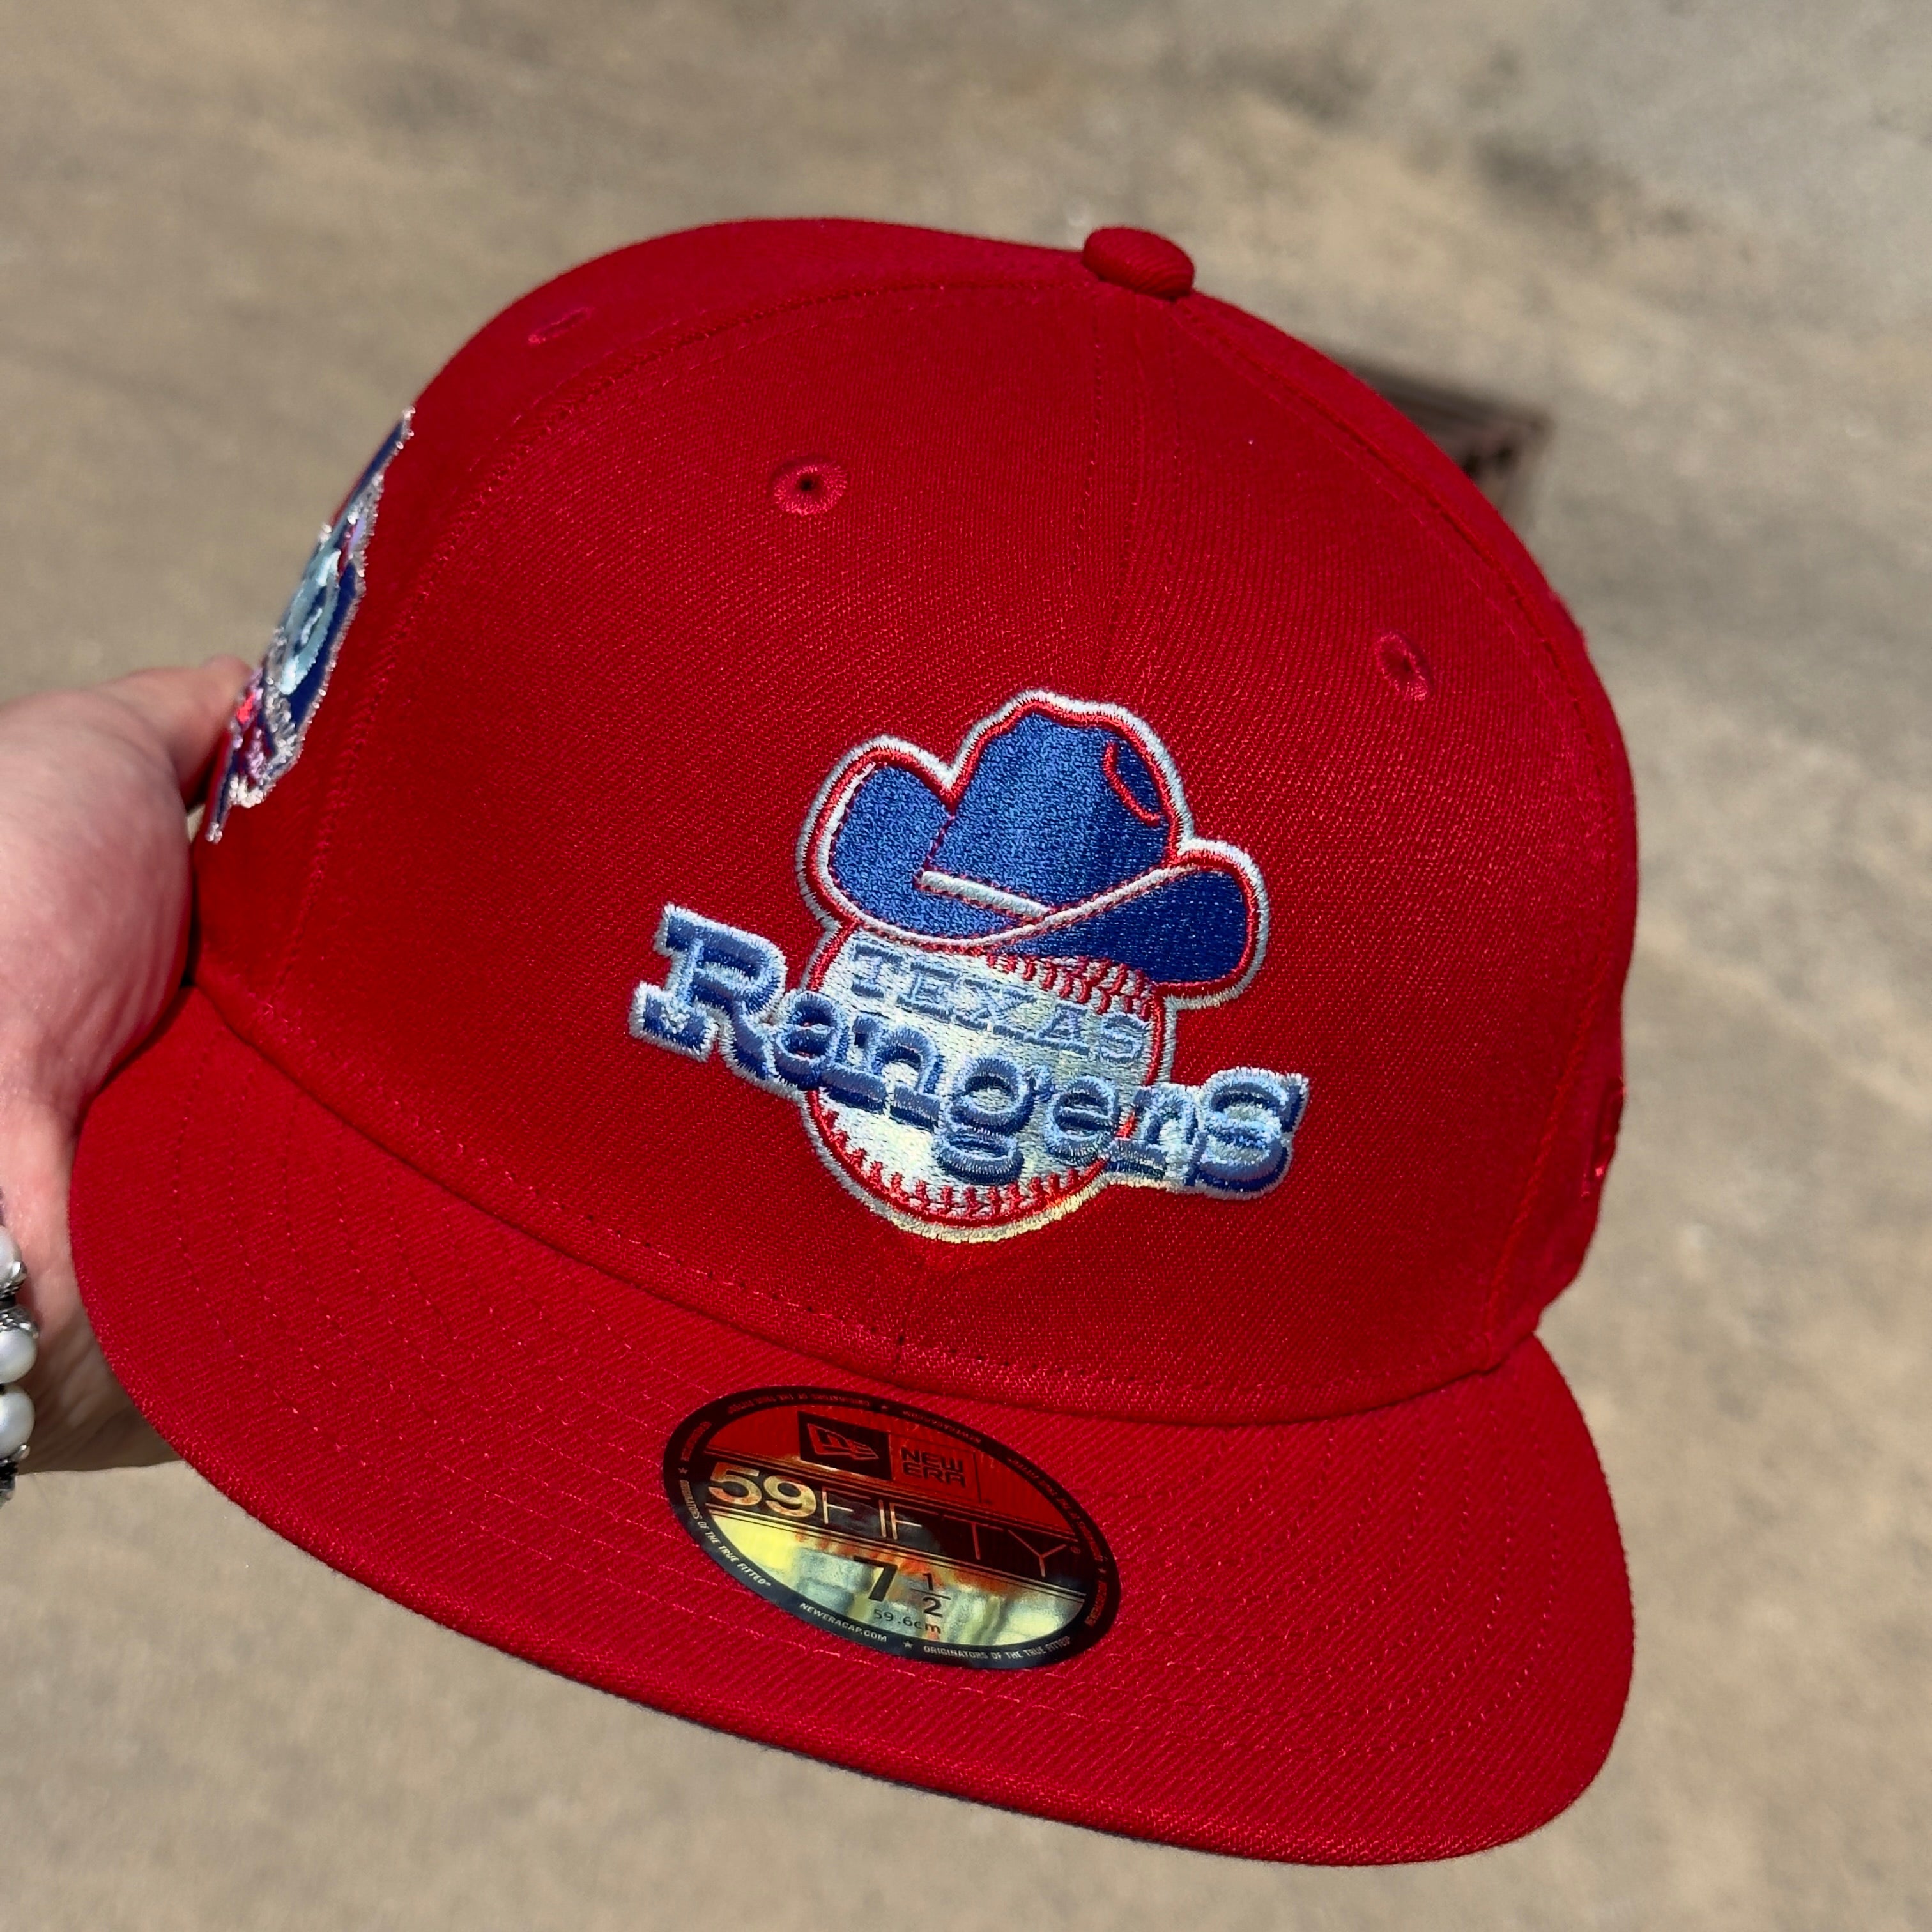 1/2 NEW Red Dallas Texas Rangers 40th Anniversary Hatclub 59fifty New Era Fitted Hat Cap